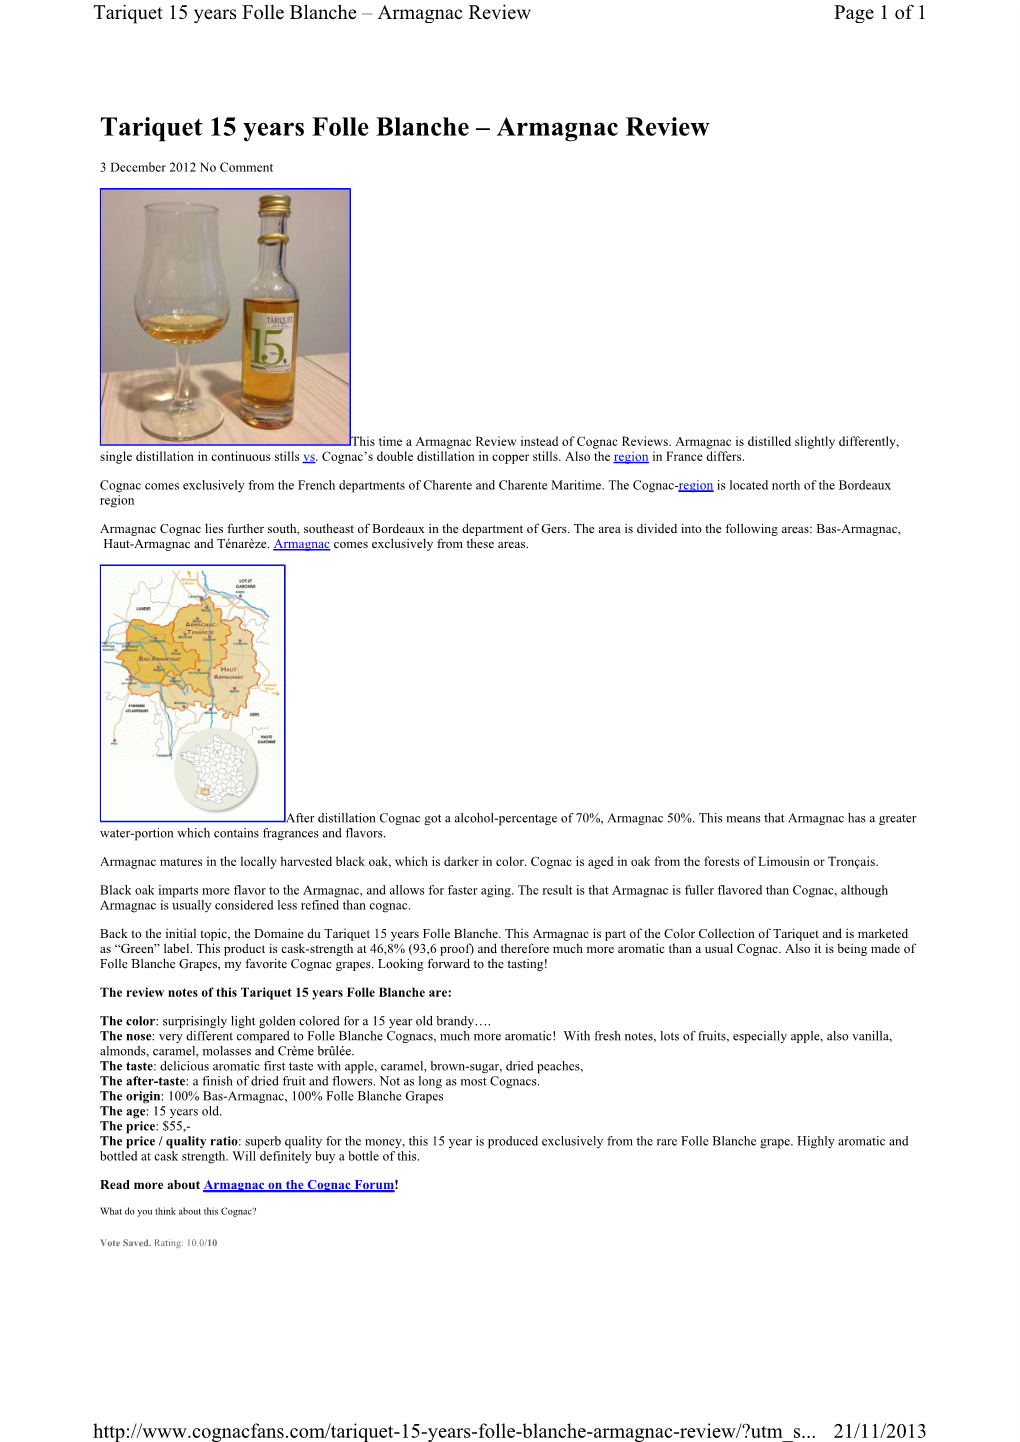 Tariquet 15 Years Folle Blanche – Armagnac Review Page 1 of 1